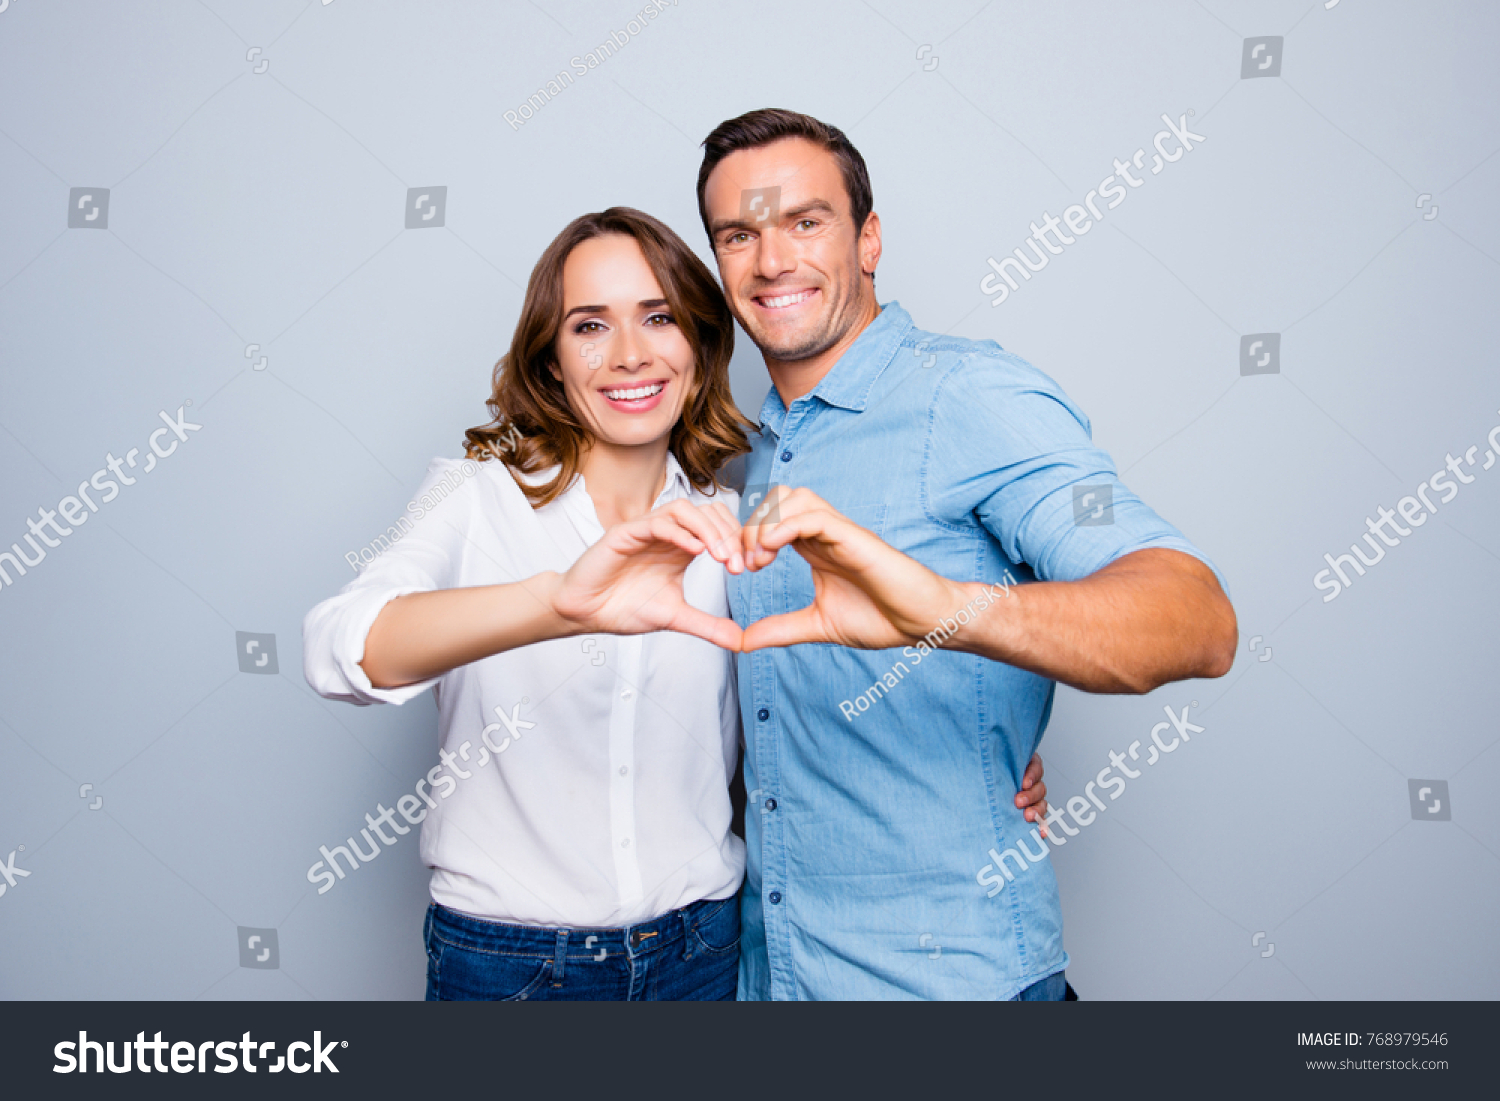 Love story of cheerful, attractive, mature, adult, lovely, cute, sweet couple in casual outfit, jeans, shirt making heart with fingers over grey background #768979546